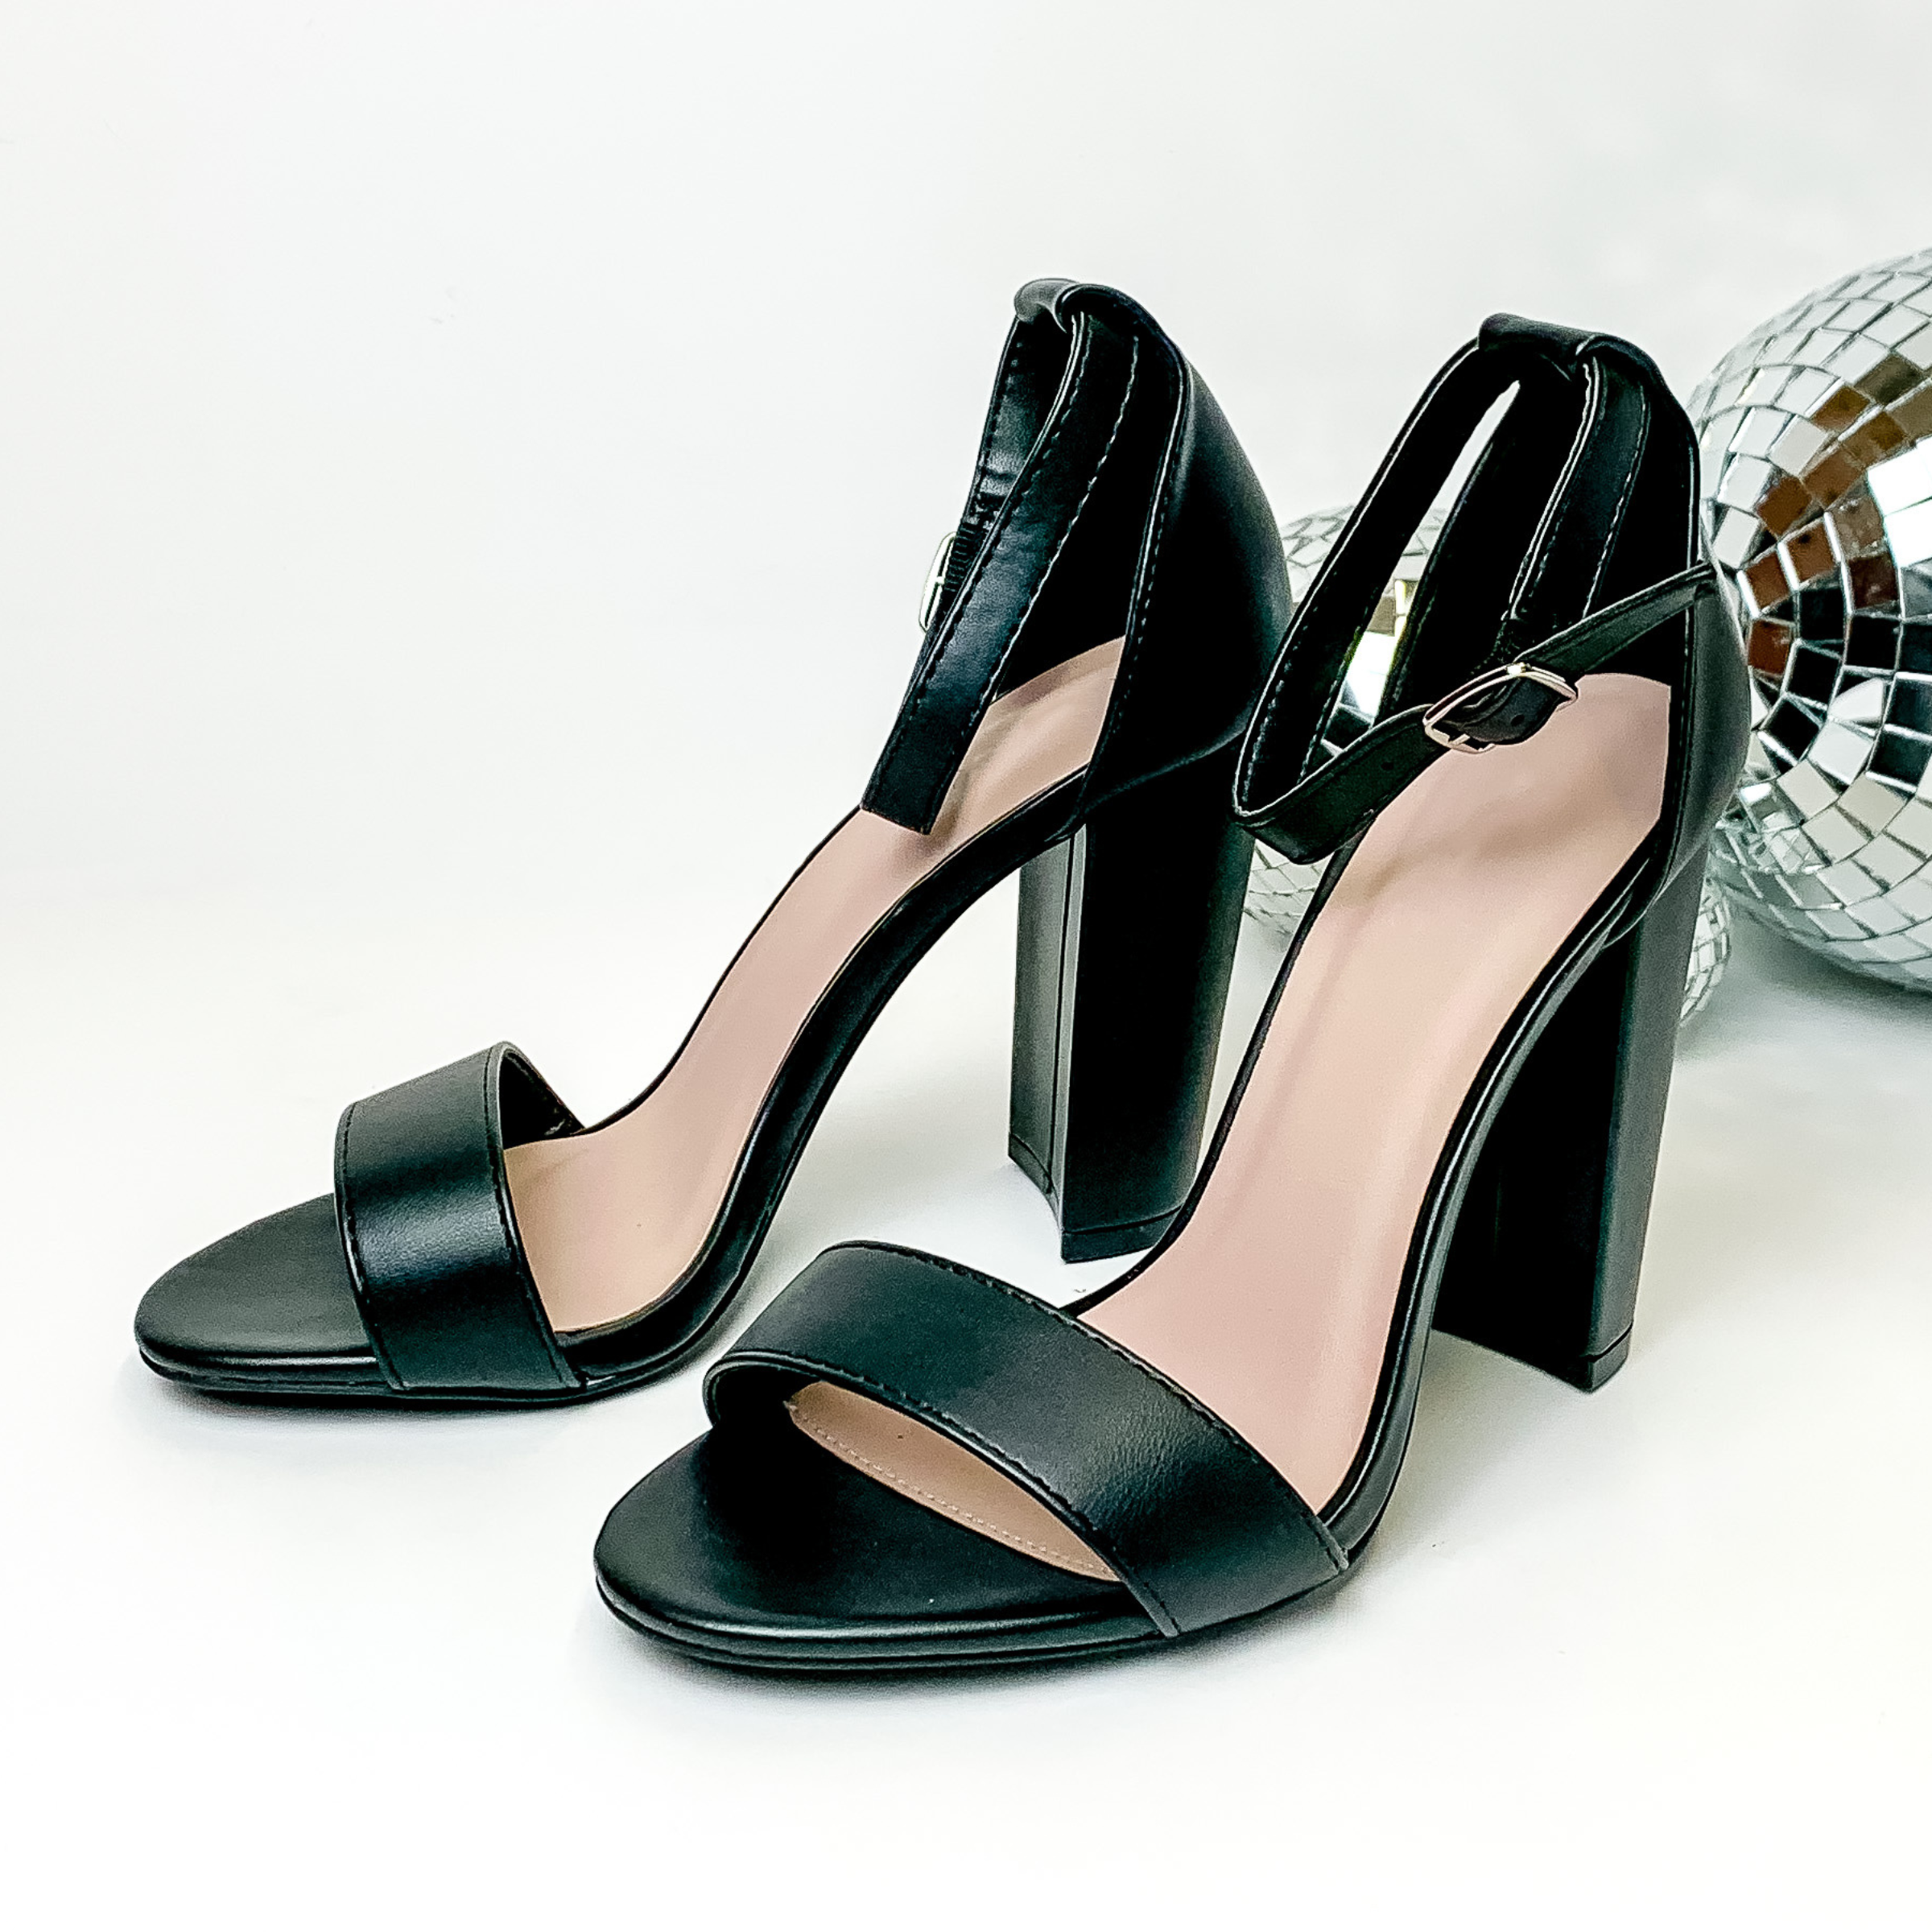 Black, block high heel sandals with an adjustable strap. These heels are pictured on a white background with disco balls on the right side of the heels. 